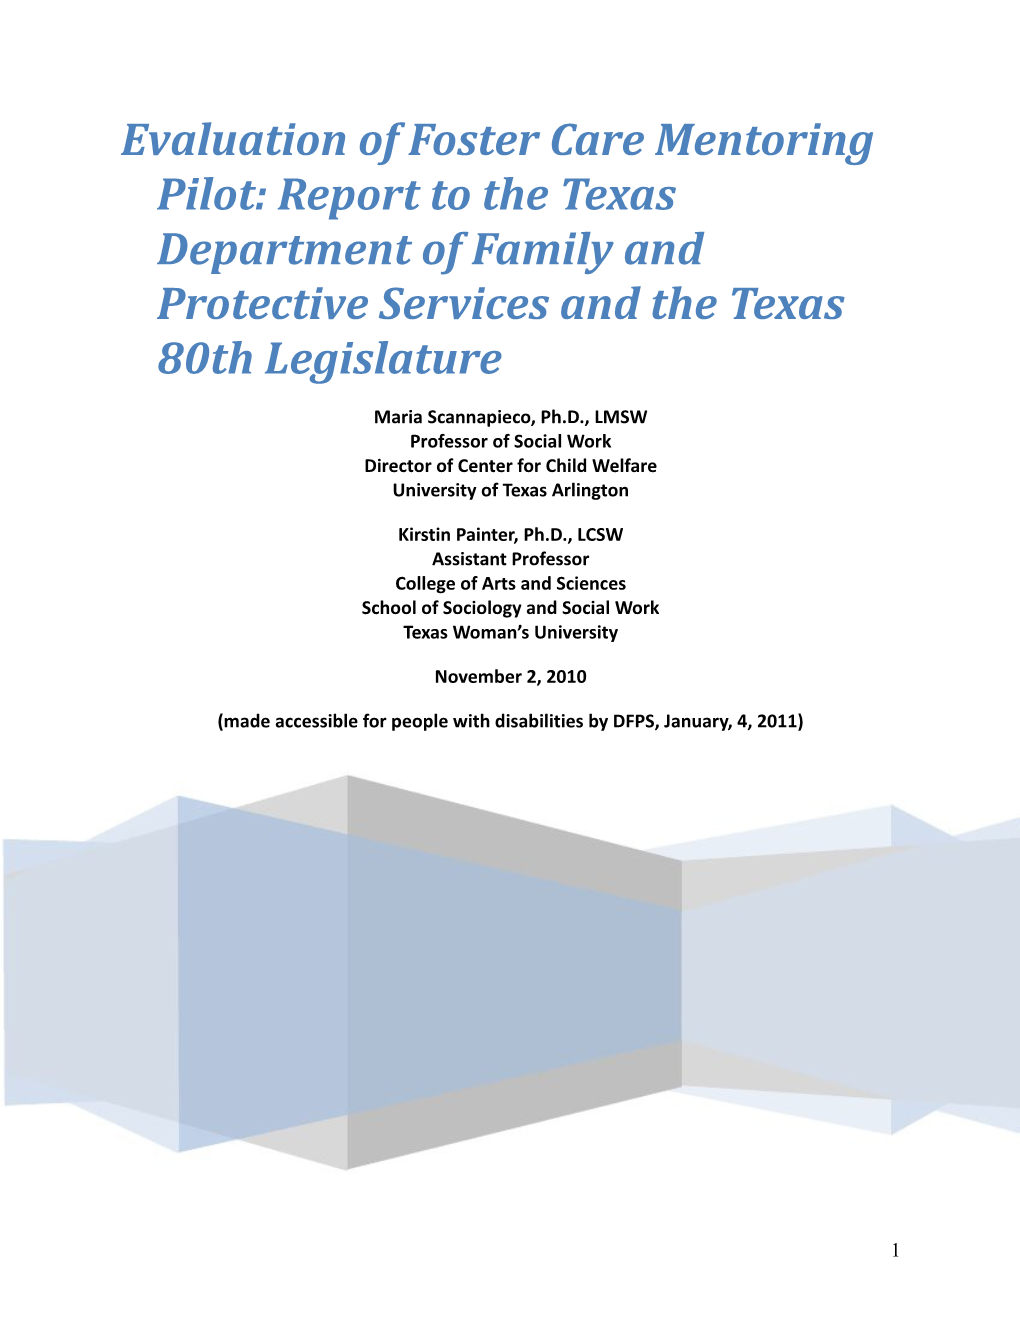 Evaluation of Foster Care Mentoring Pilot: Report to the Texas Department of Family And